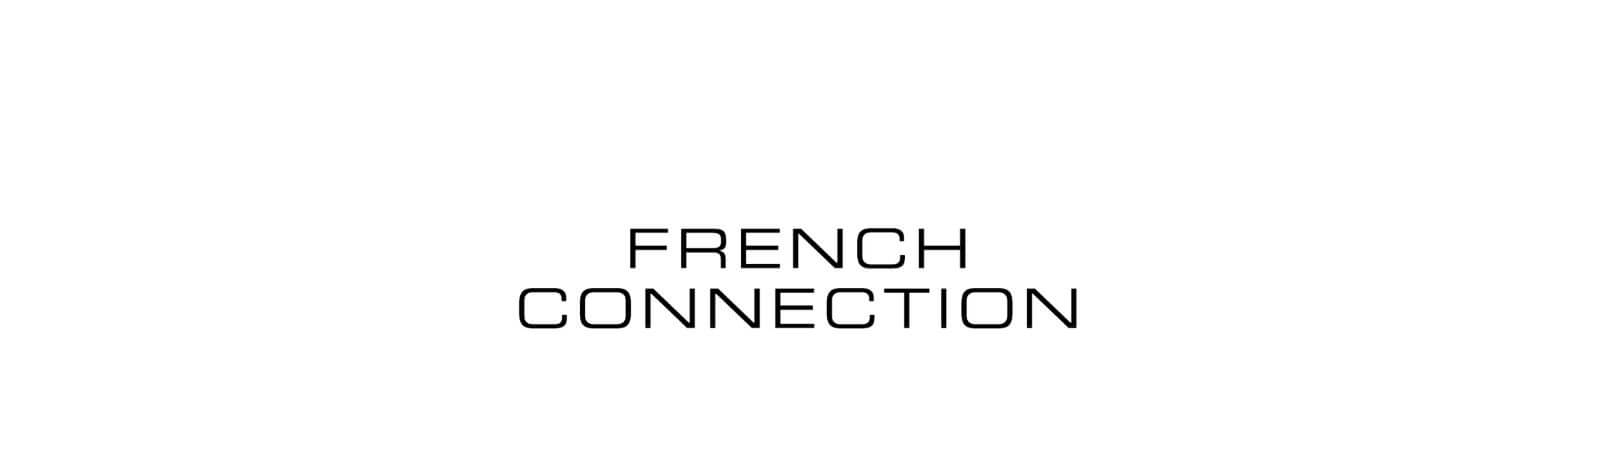 french connection banner